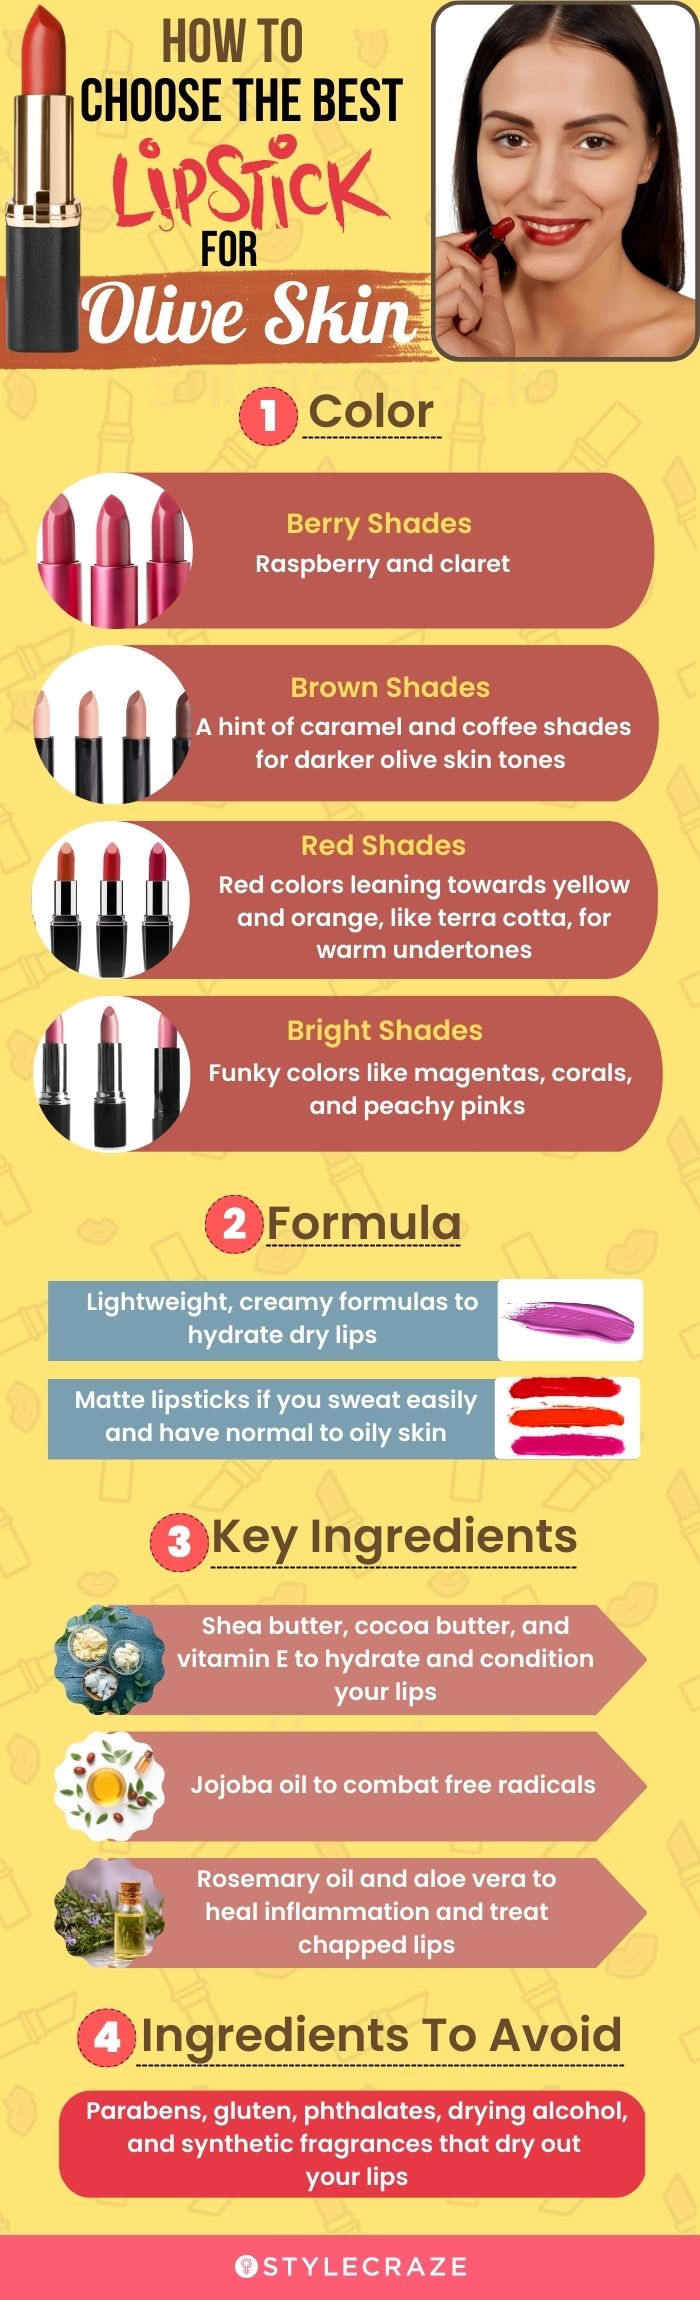 How To Choose The Best Lipstick For Olive Skin